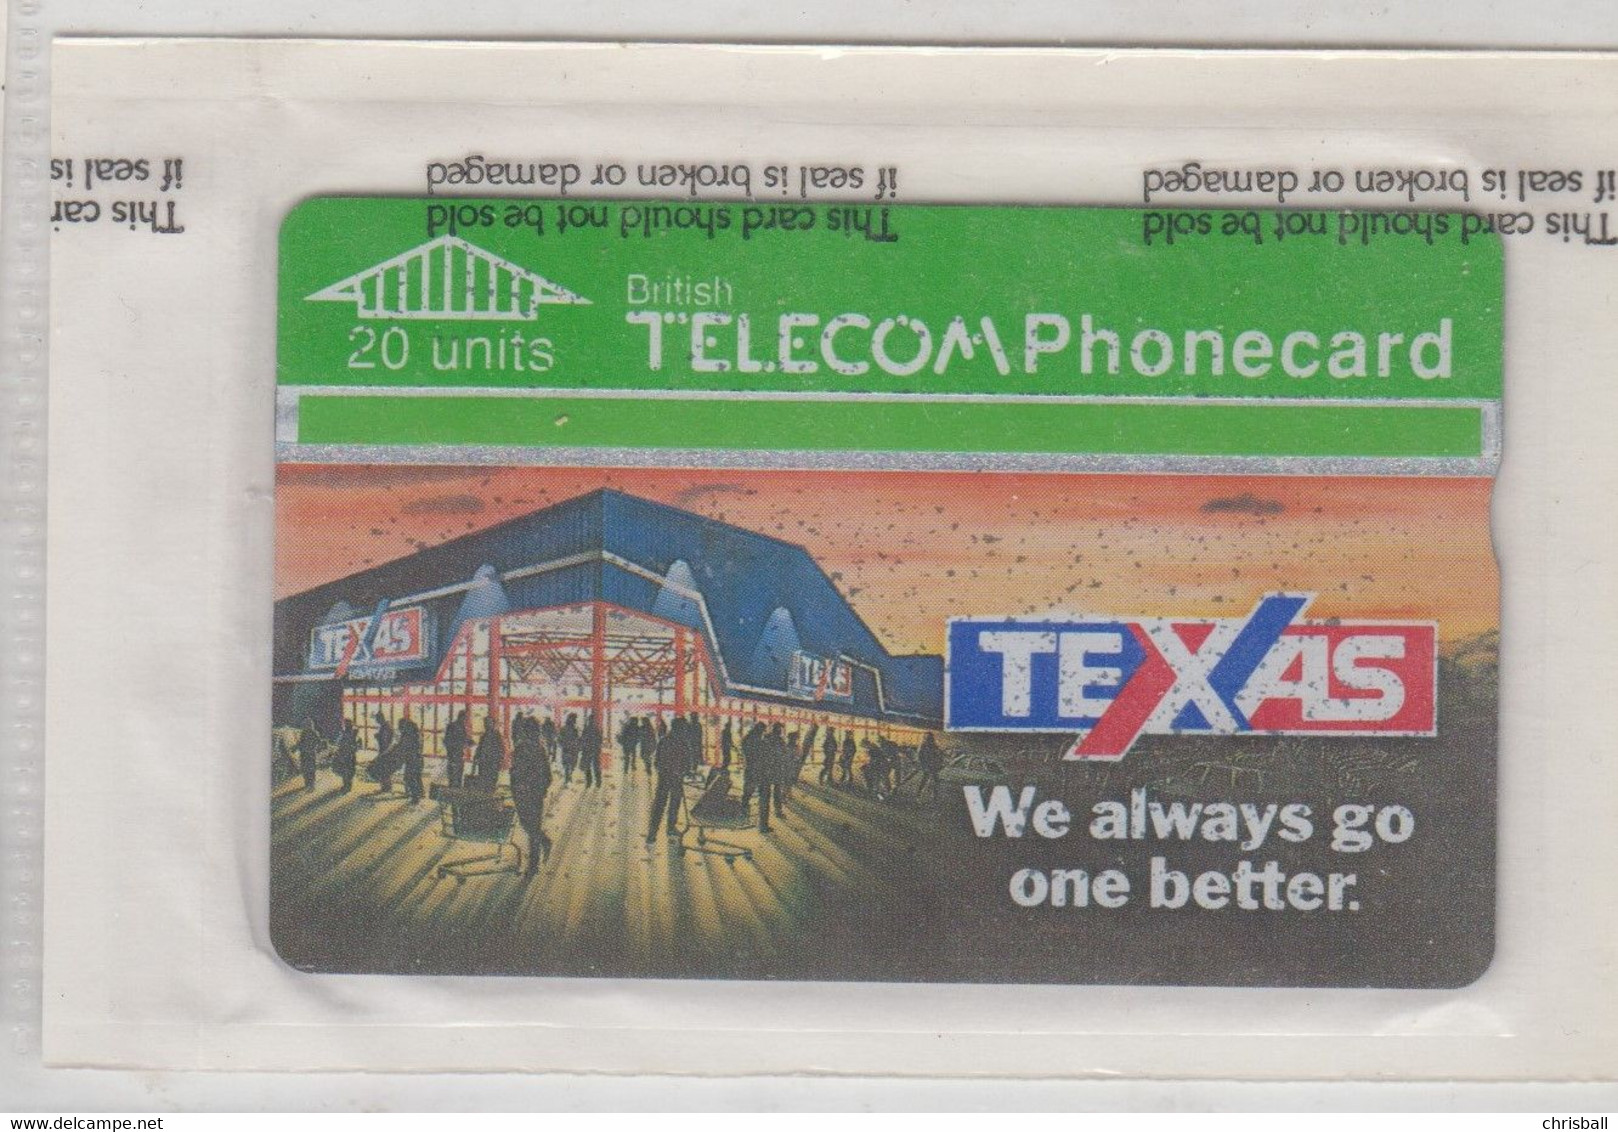 BT Texas Phonecard - Mint Wrapped - BT Advertising Issues